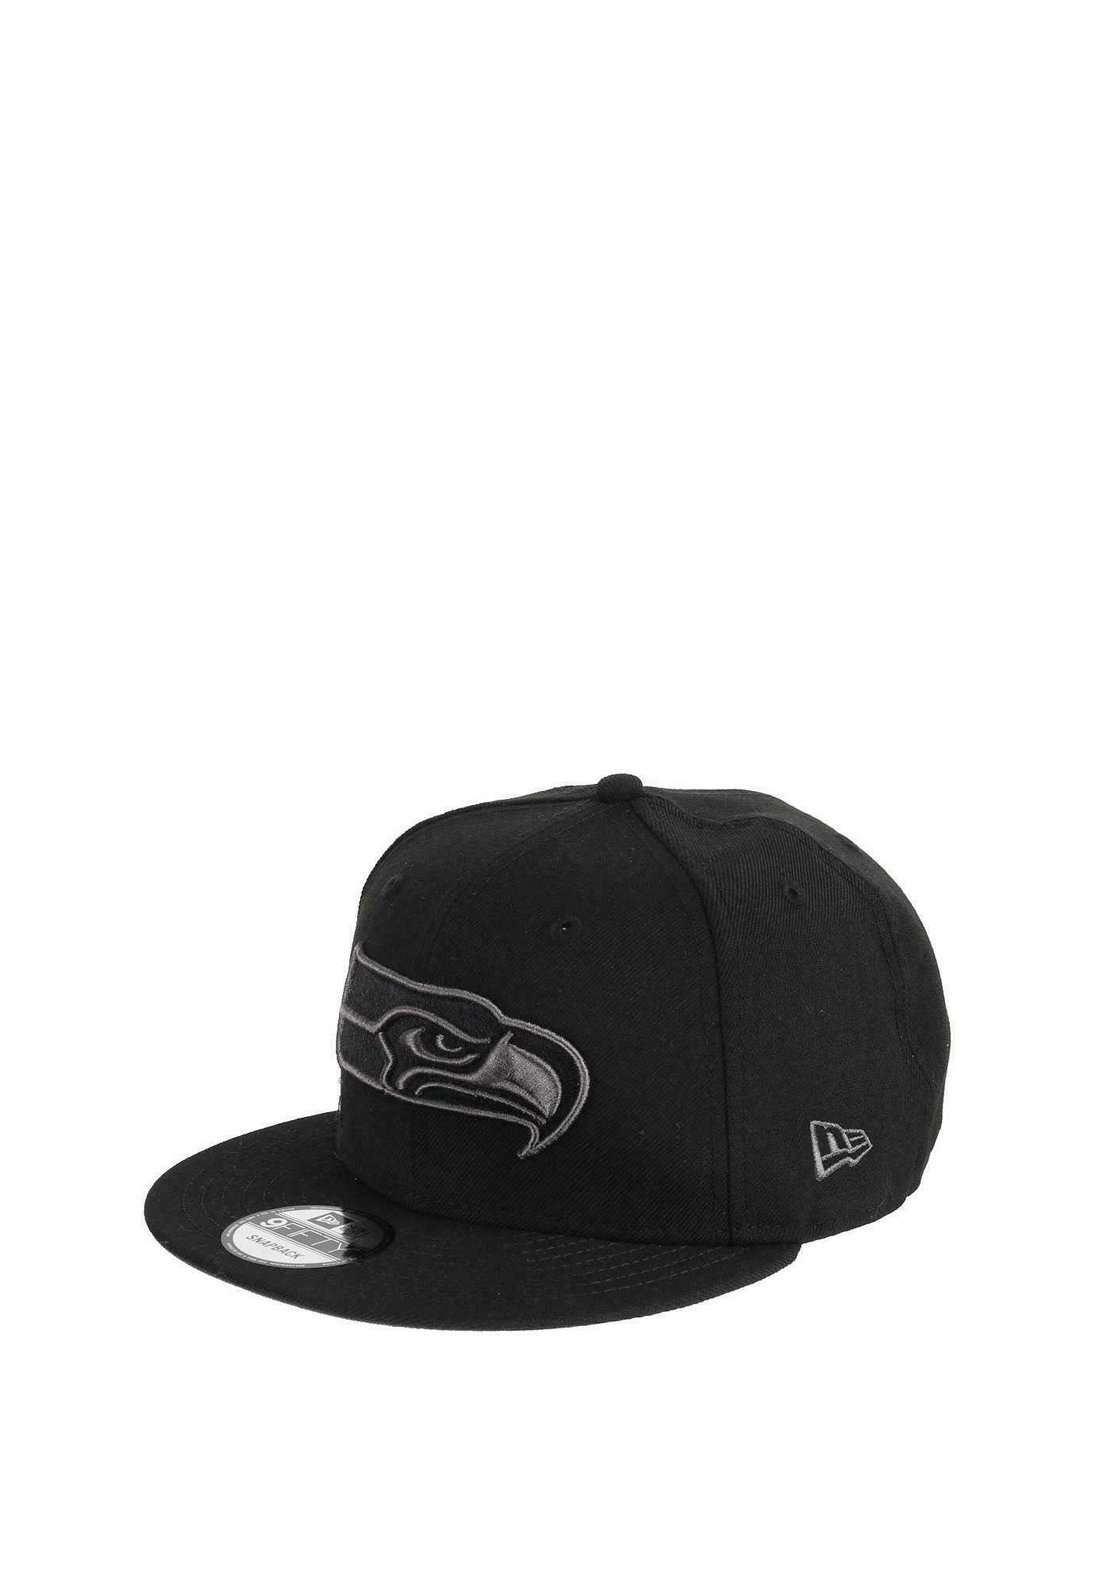 Кепка SEATTLE SEAHAWKS 9FIFTY